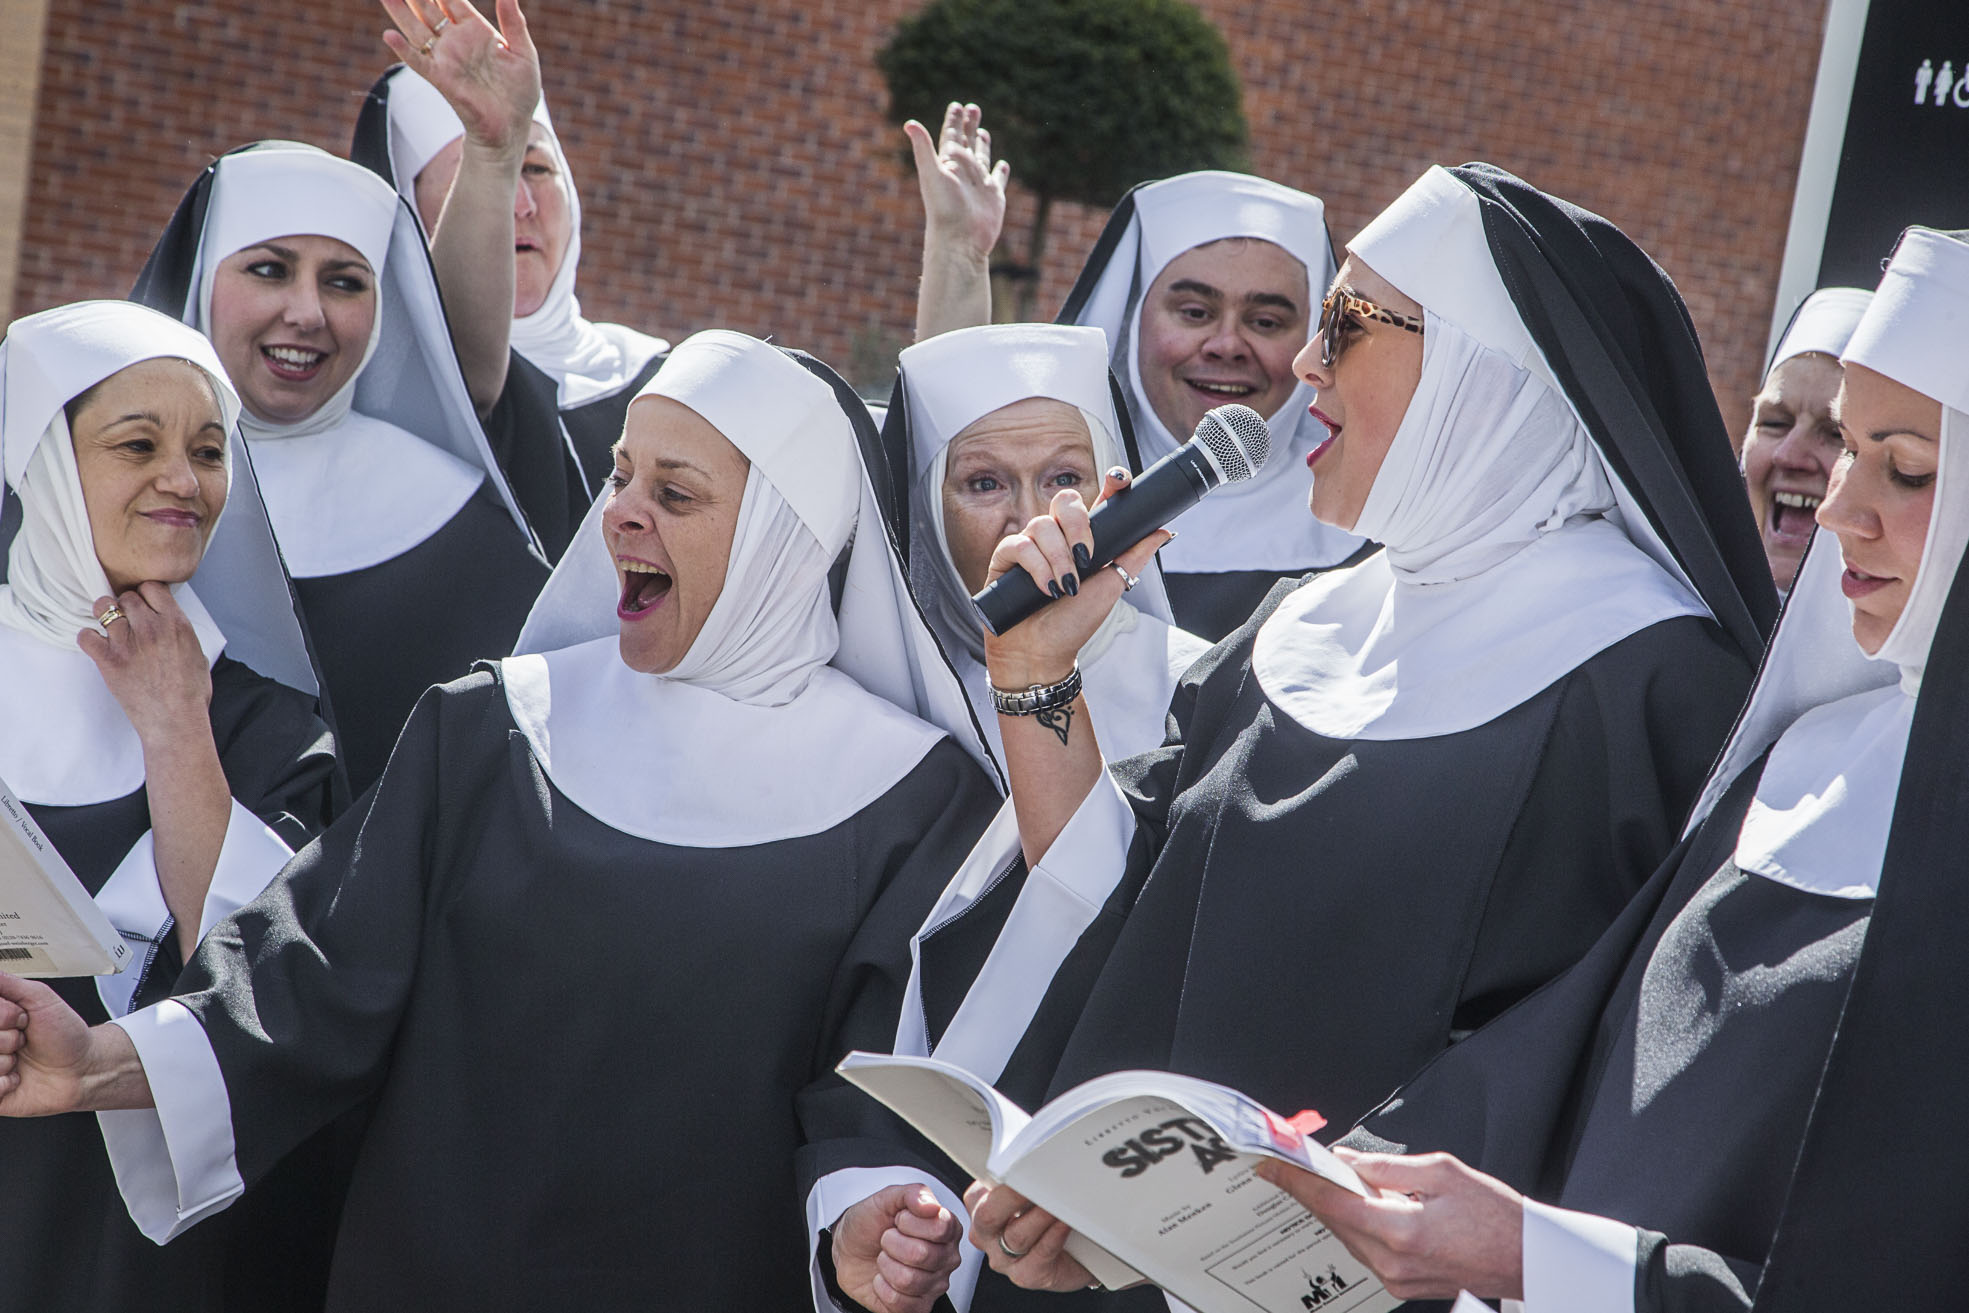 Sassy nuns from Llangollen surprise shoppers with musical performance